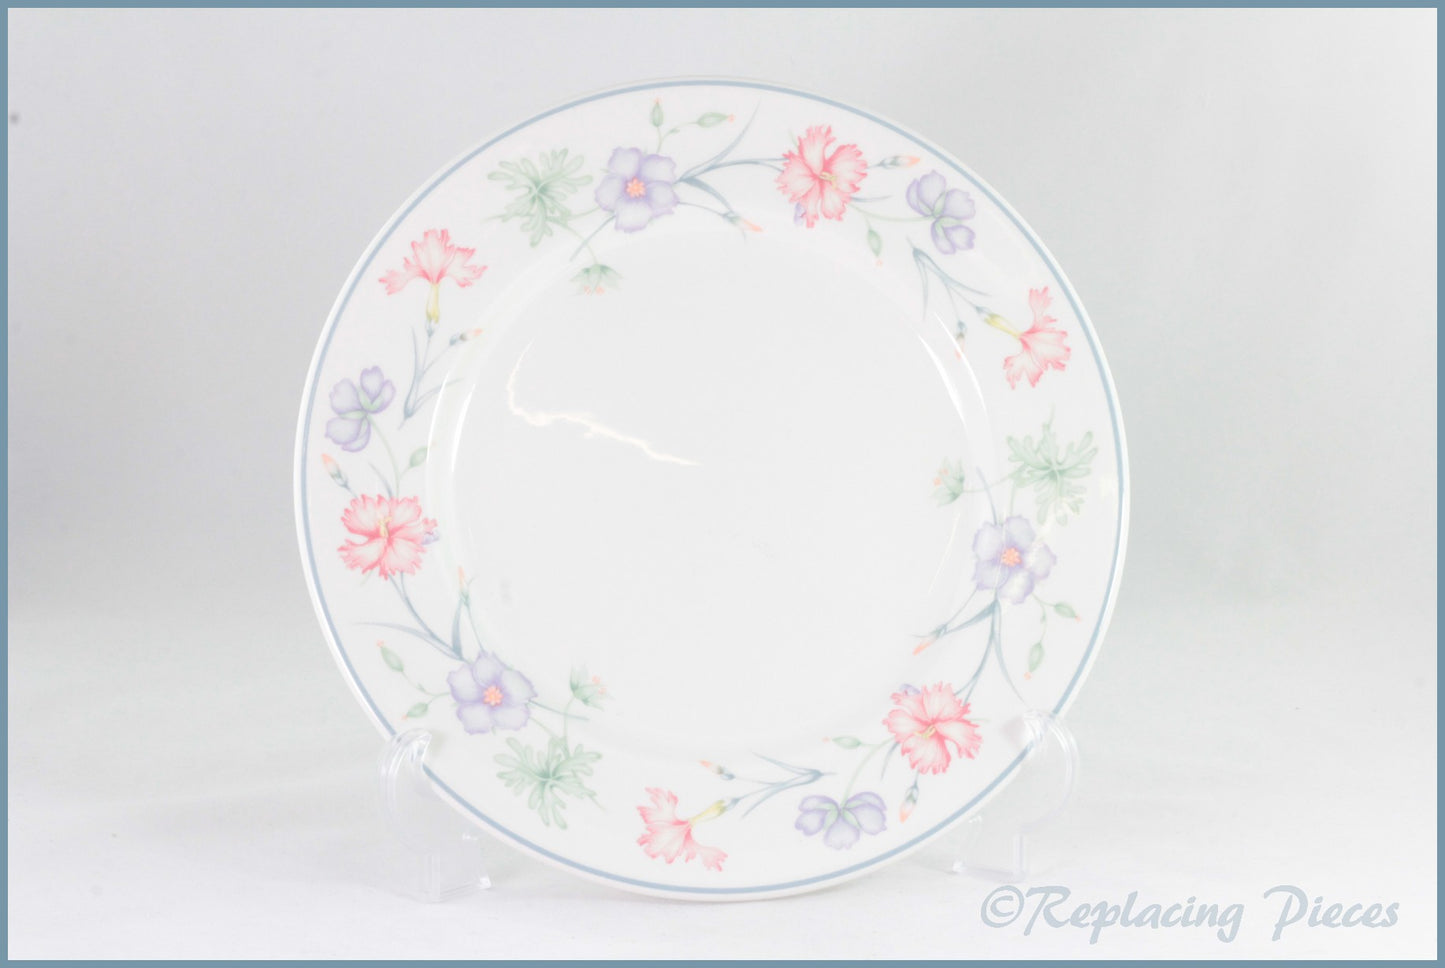 Boots - Carnation - 7" Side Plate